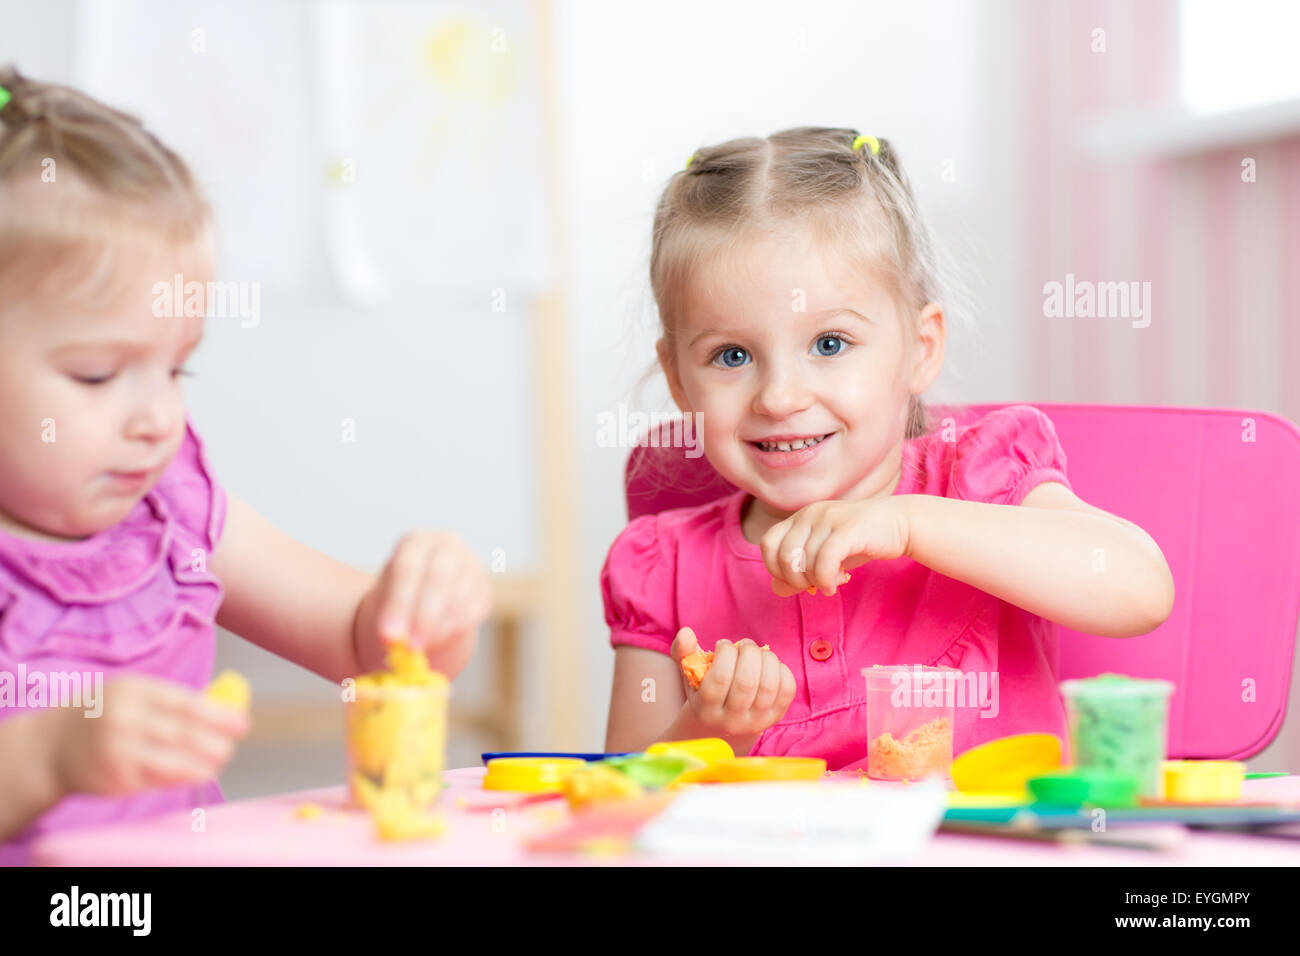 children playing with colorful clay Stock Photo